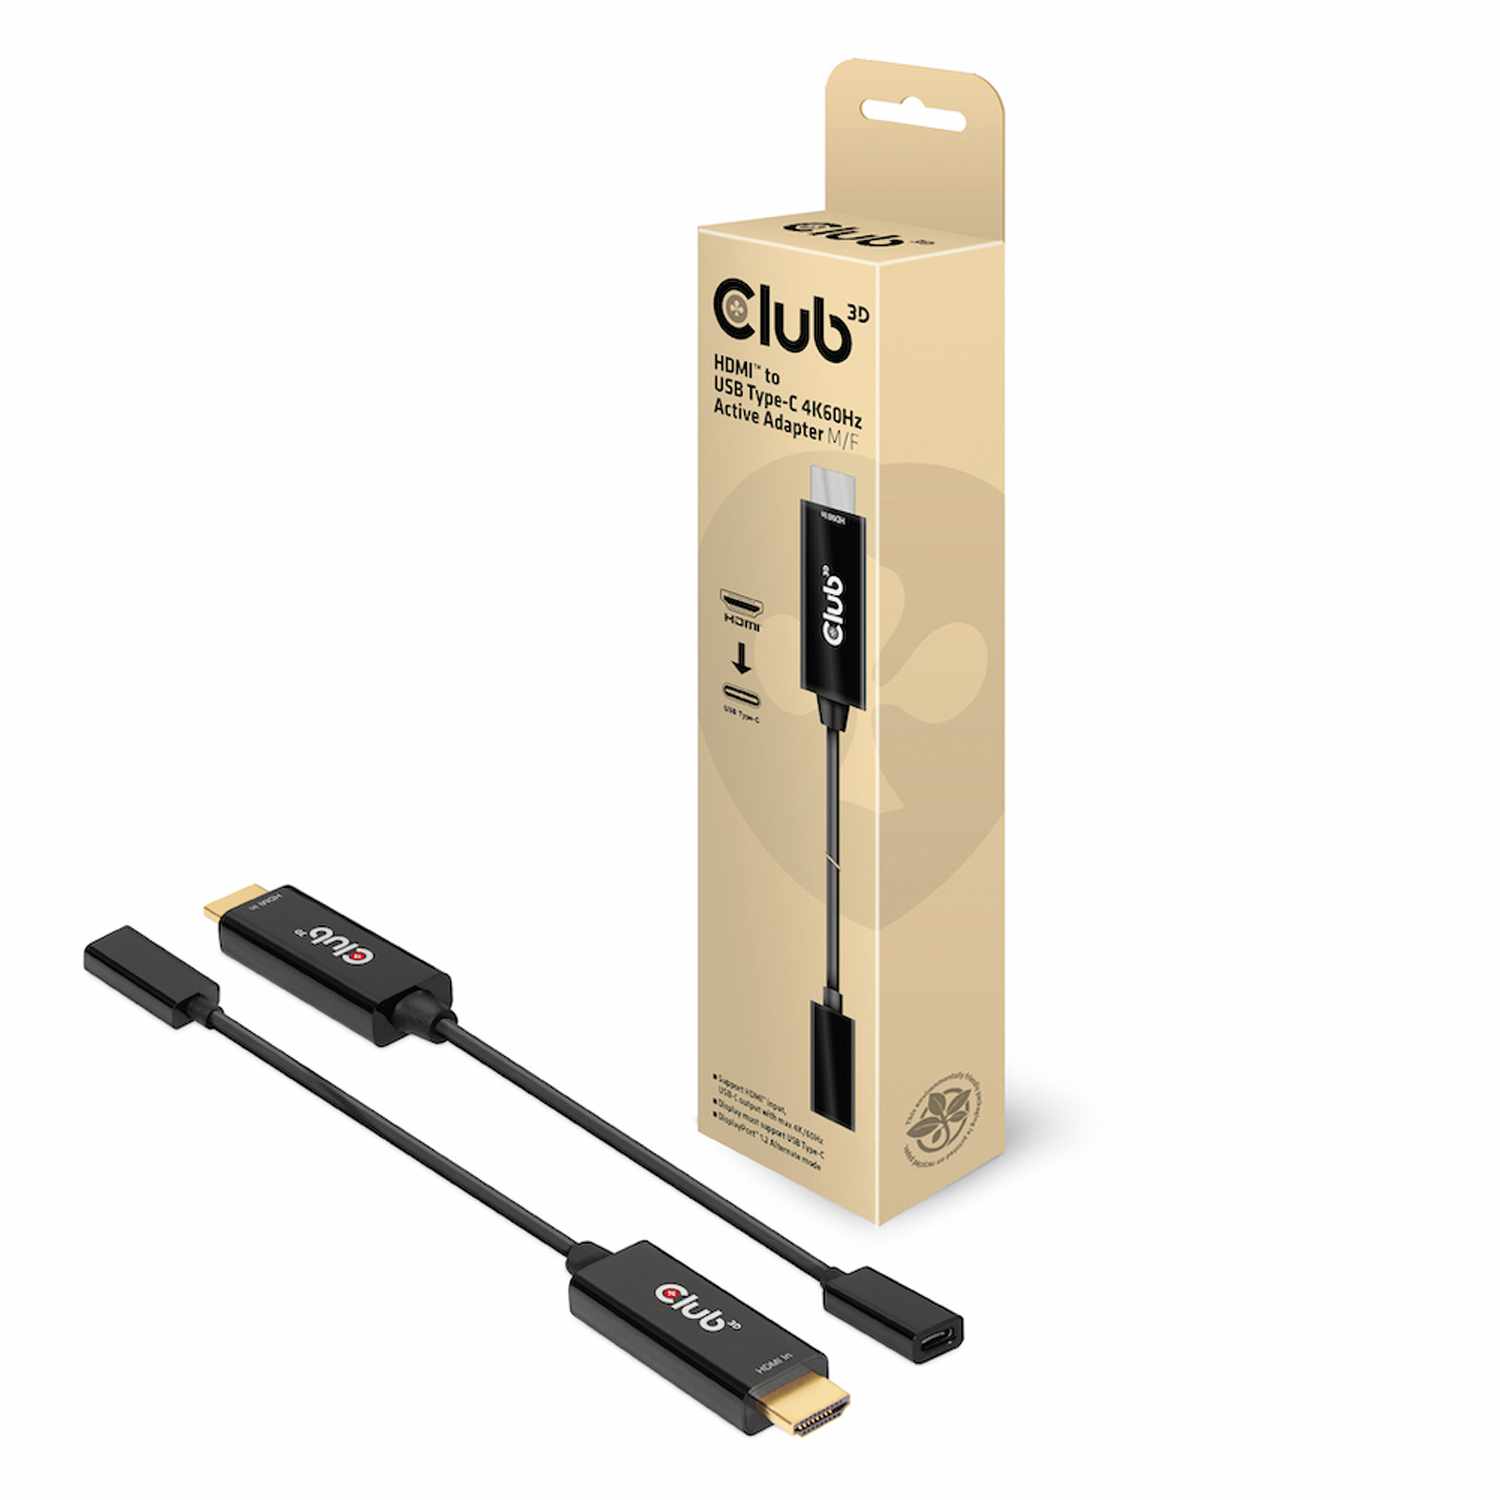 Club3D HDMI to USB-C 4K60Hz Active Adapter M/F